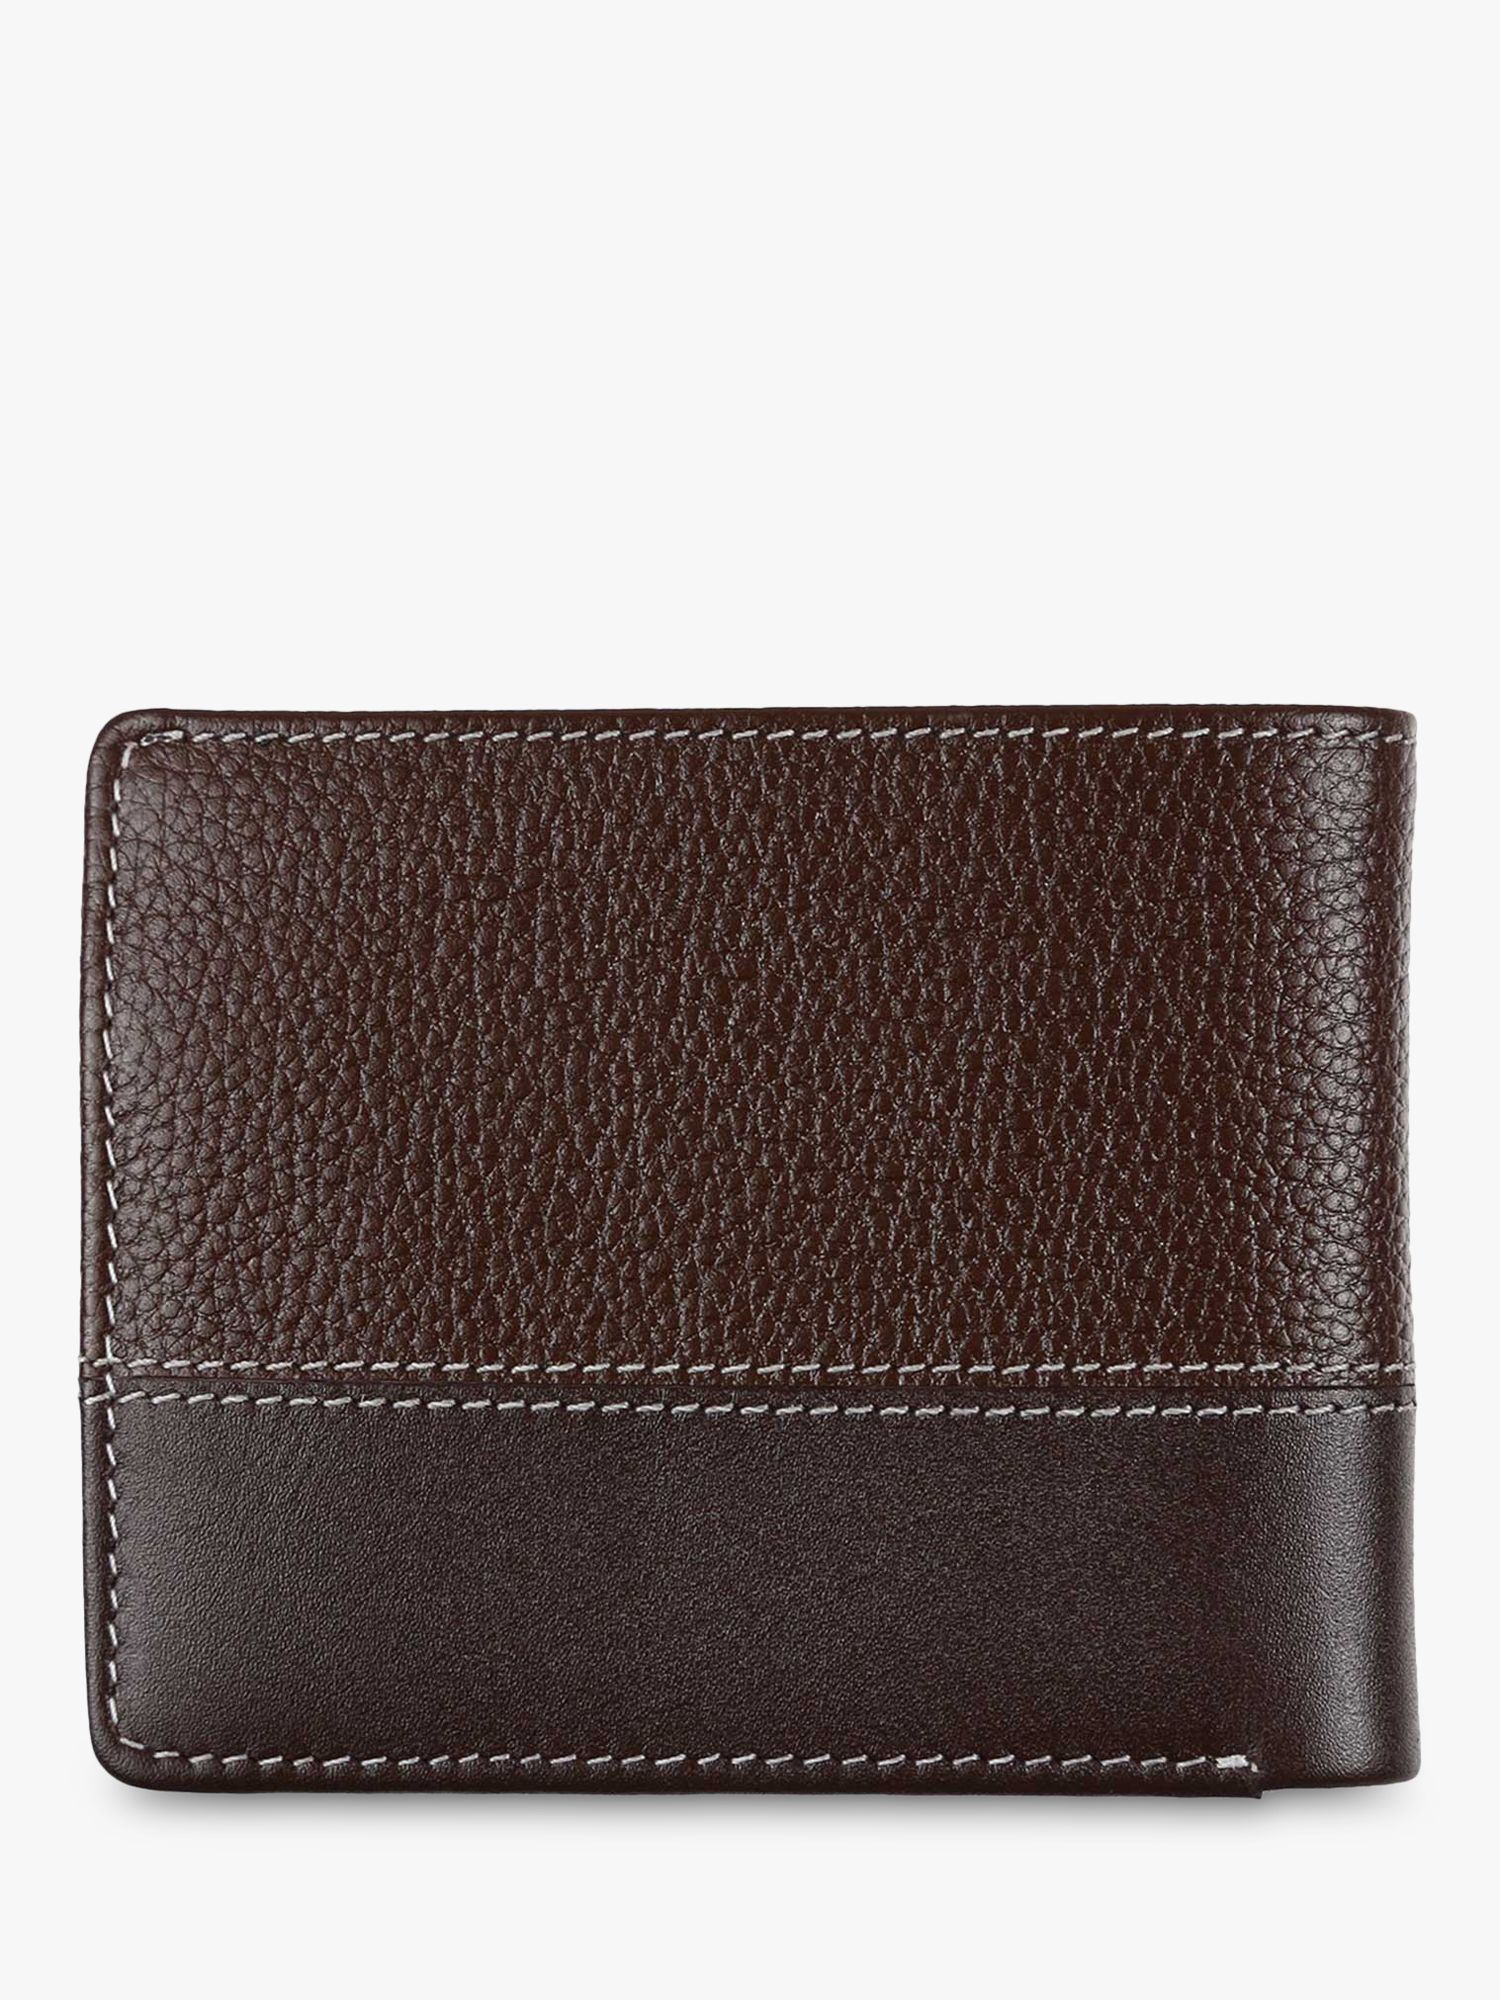 LUKE 1977 Volcombe Leather Wallet, Brown, One Size